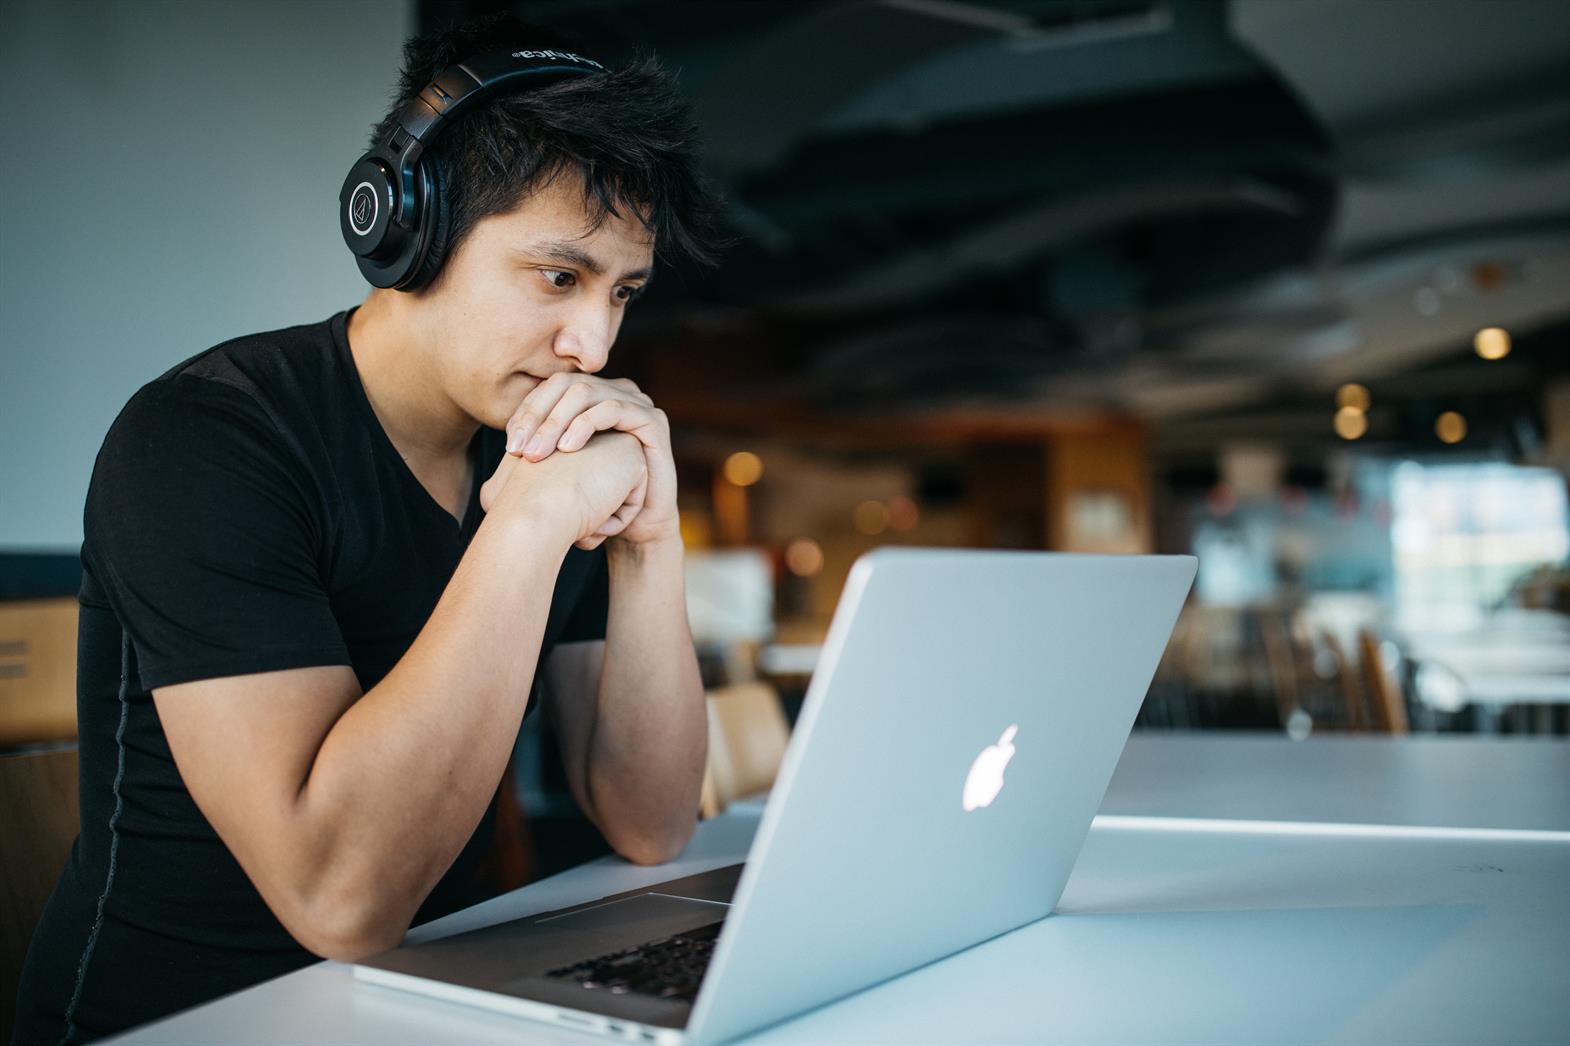 Young man wearing headphones looking at a laptop